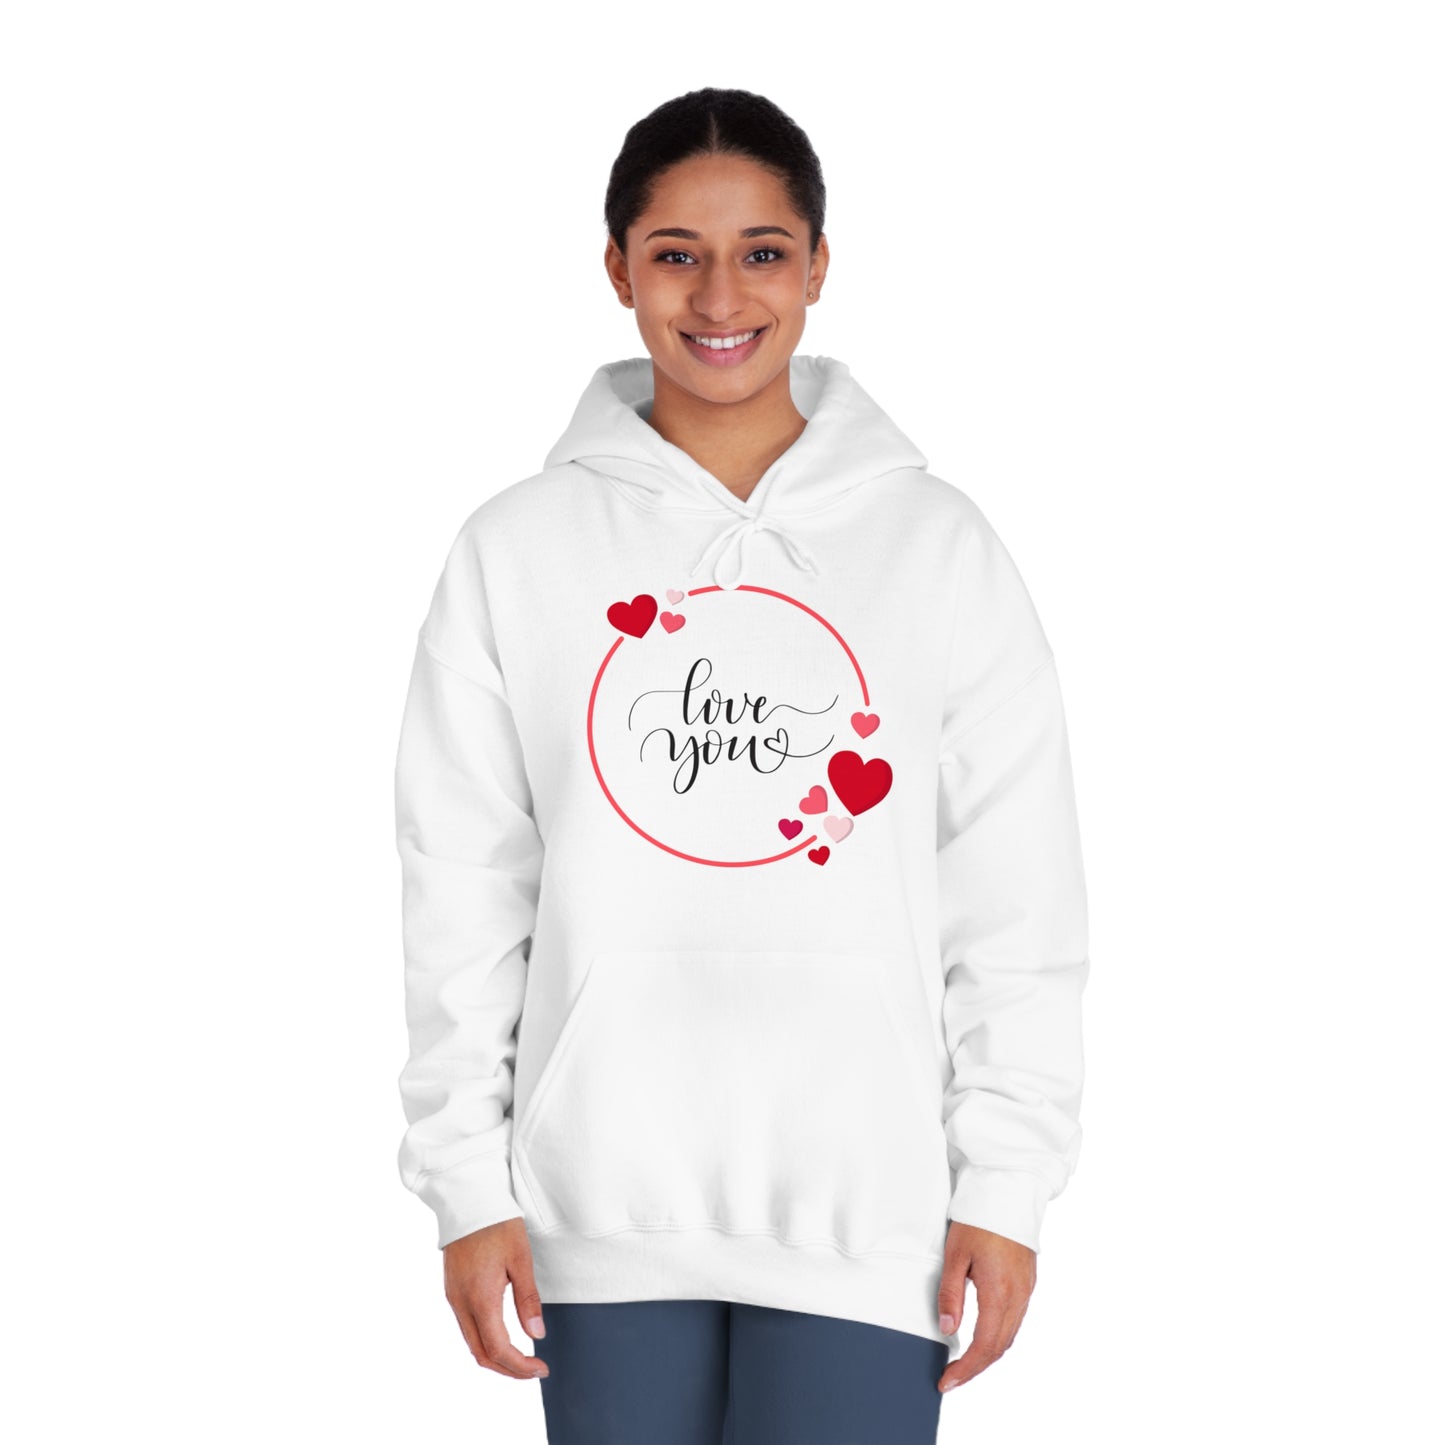 Love You with Hearts Printed Unisex DryBlend® Hooded Sweatshirt, White & Red